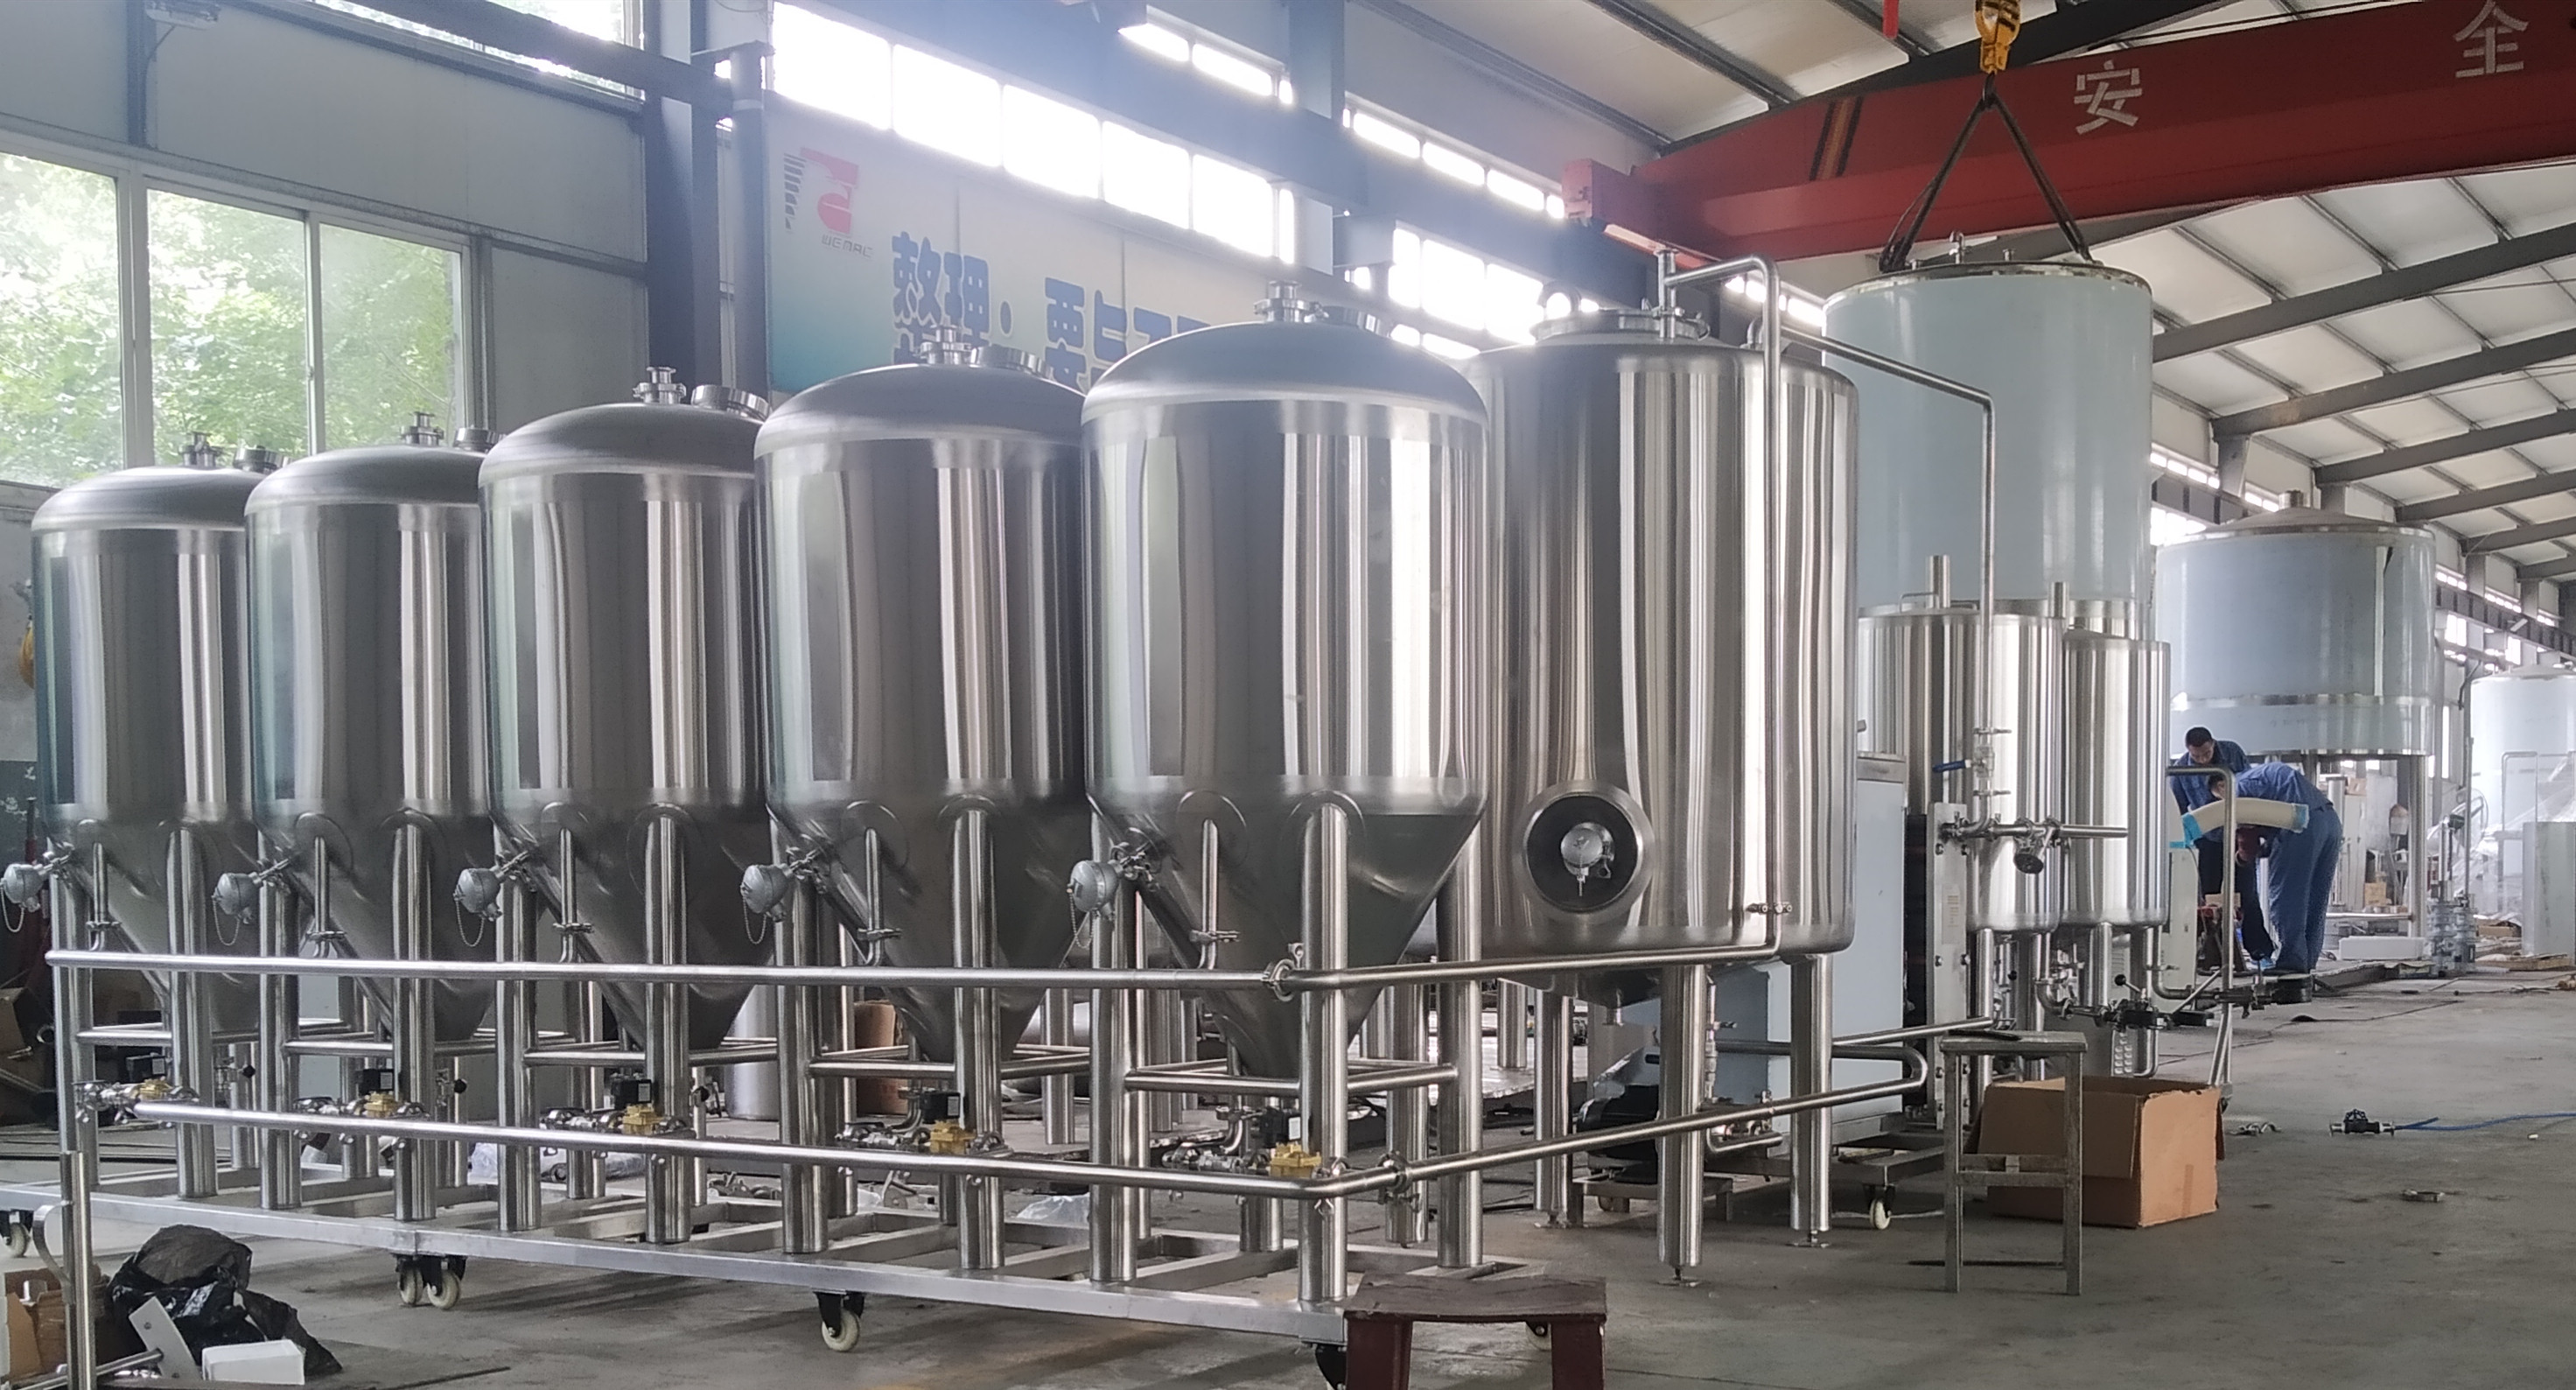 100L SUS 304 professional craft beer brewing equipment for sale 2020 Chinese supplier Z1Z